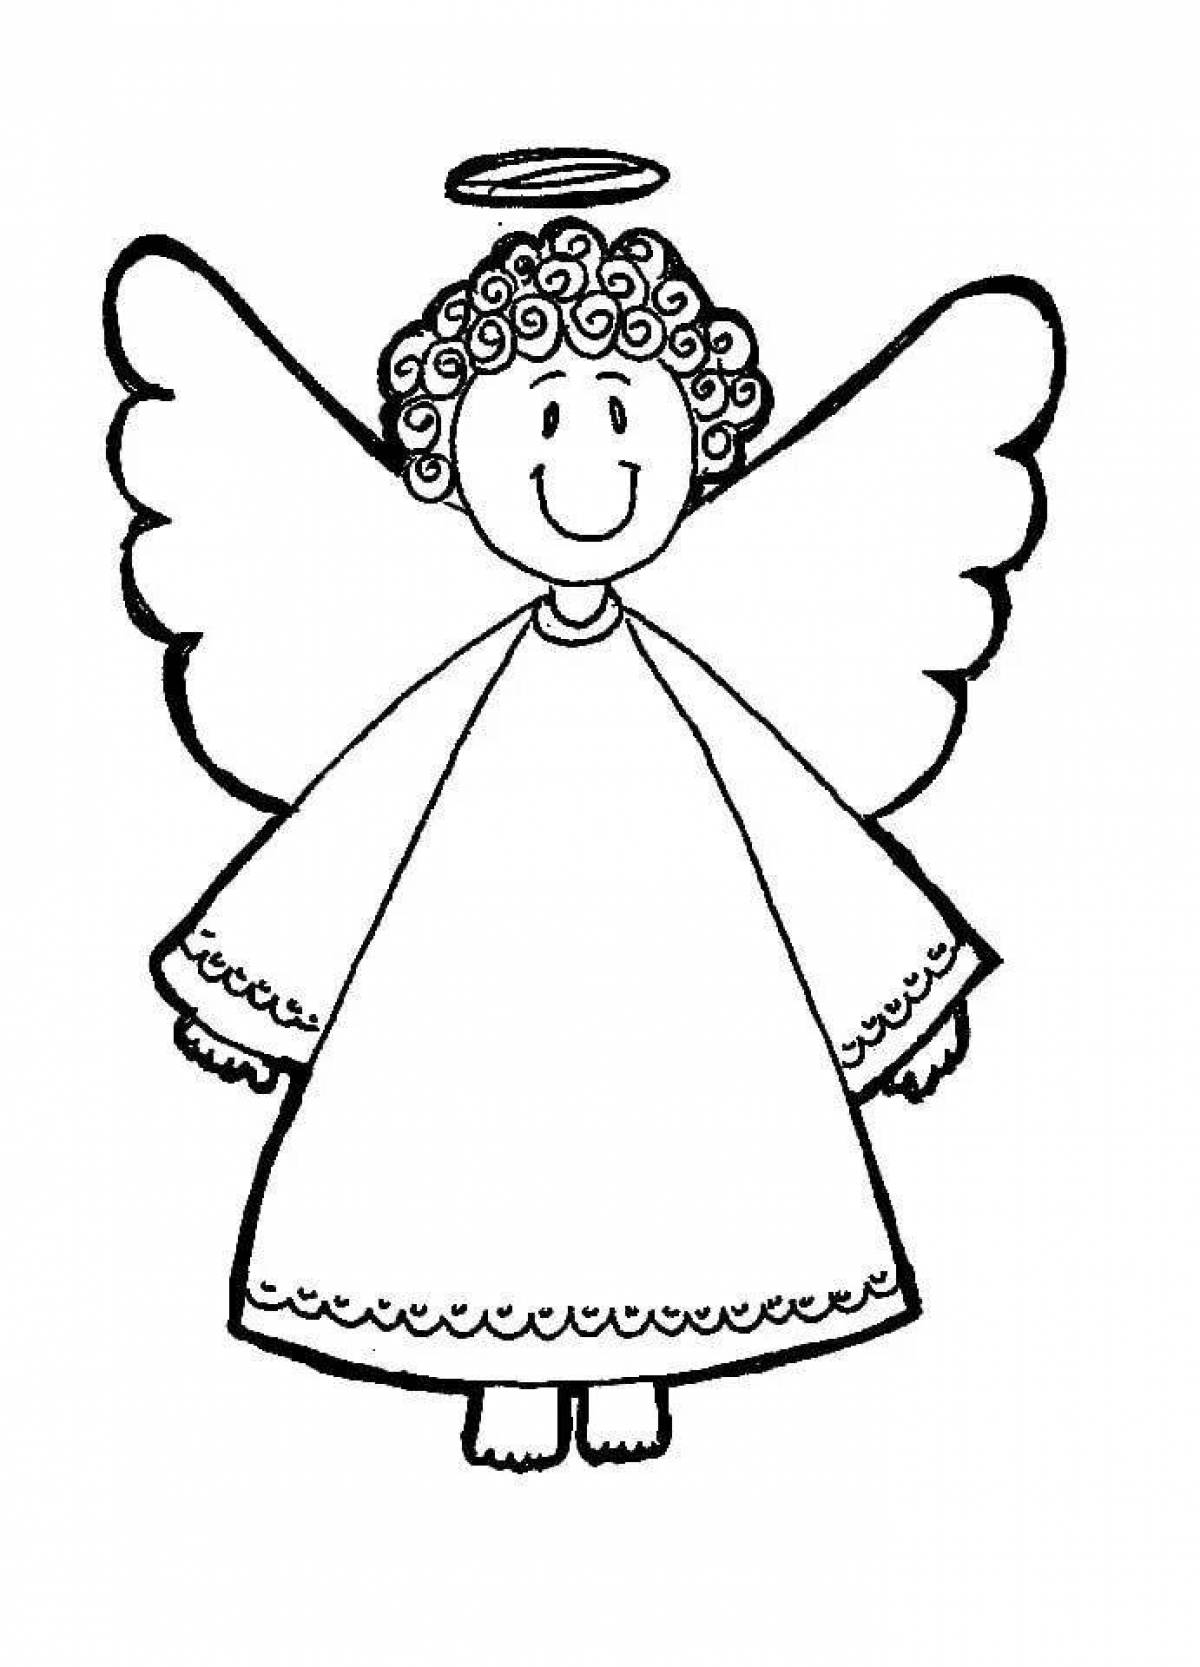 Sparkling Christmas angel coloring book for kids